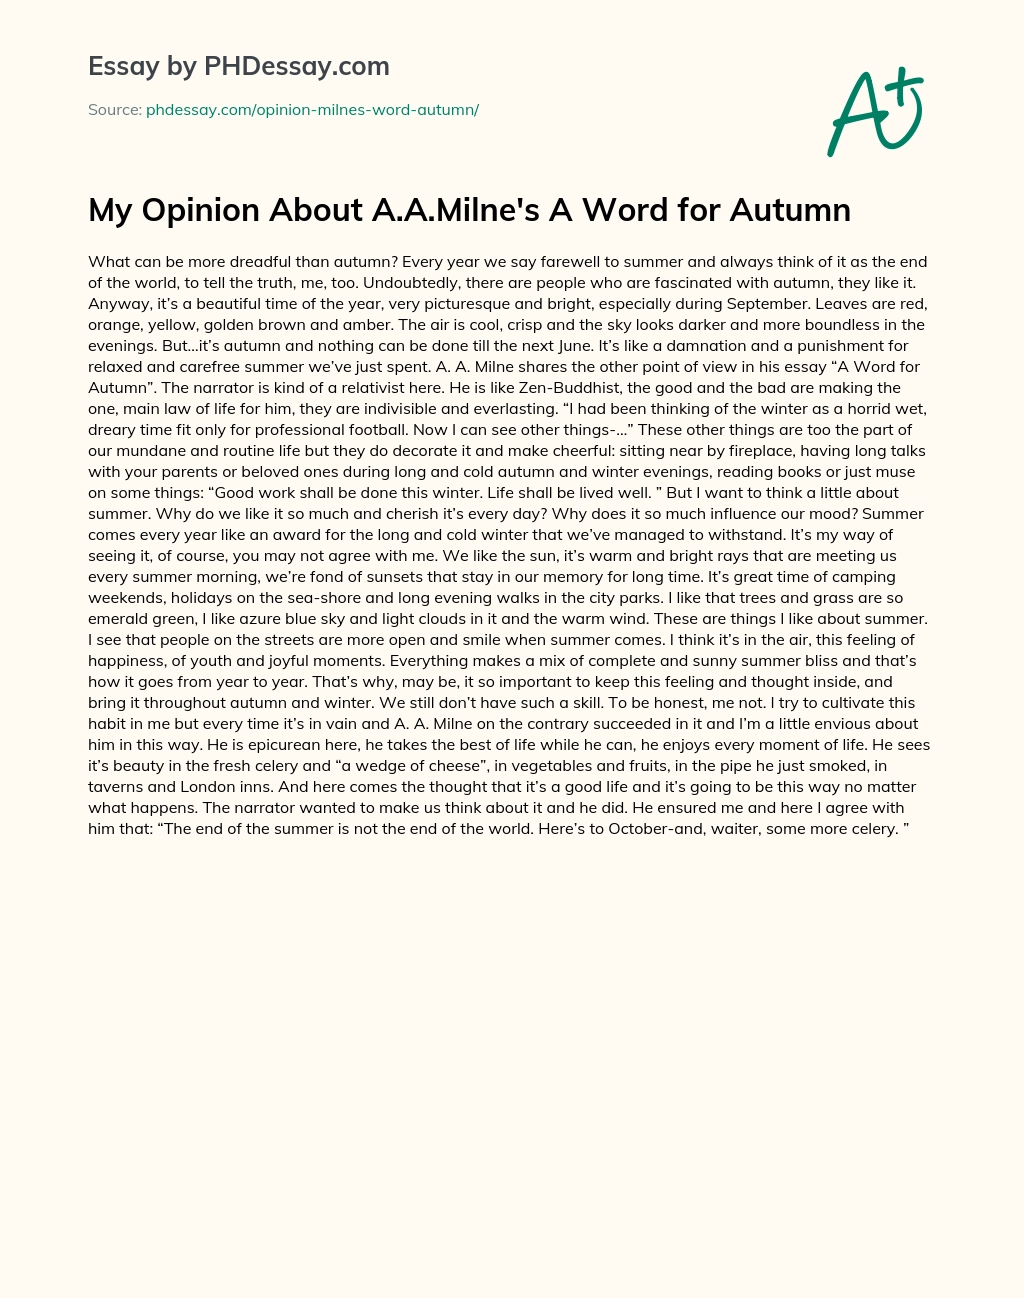 My Opinion About A.A.Milne’s A Word for Autumn essay